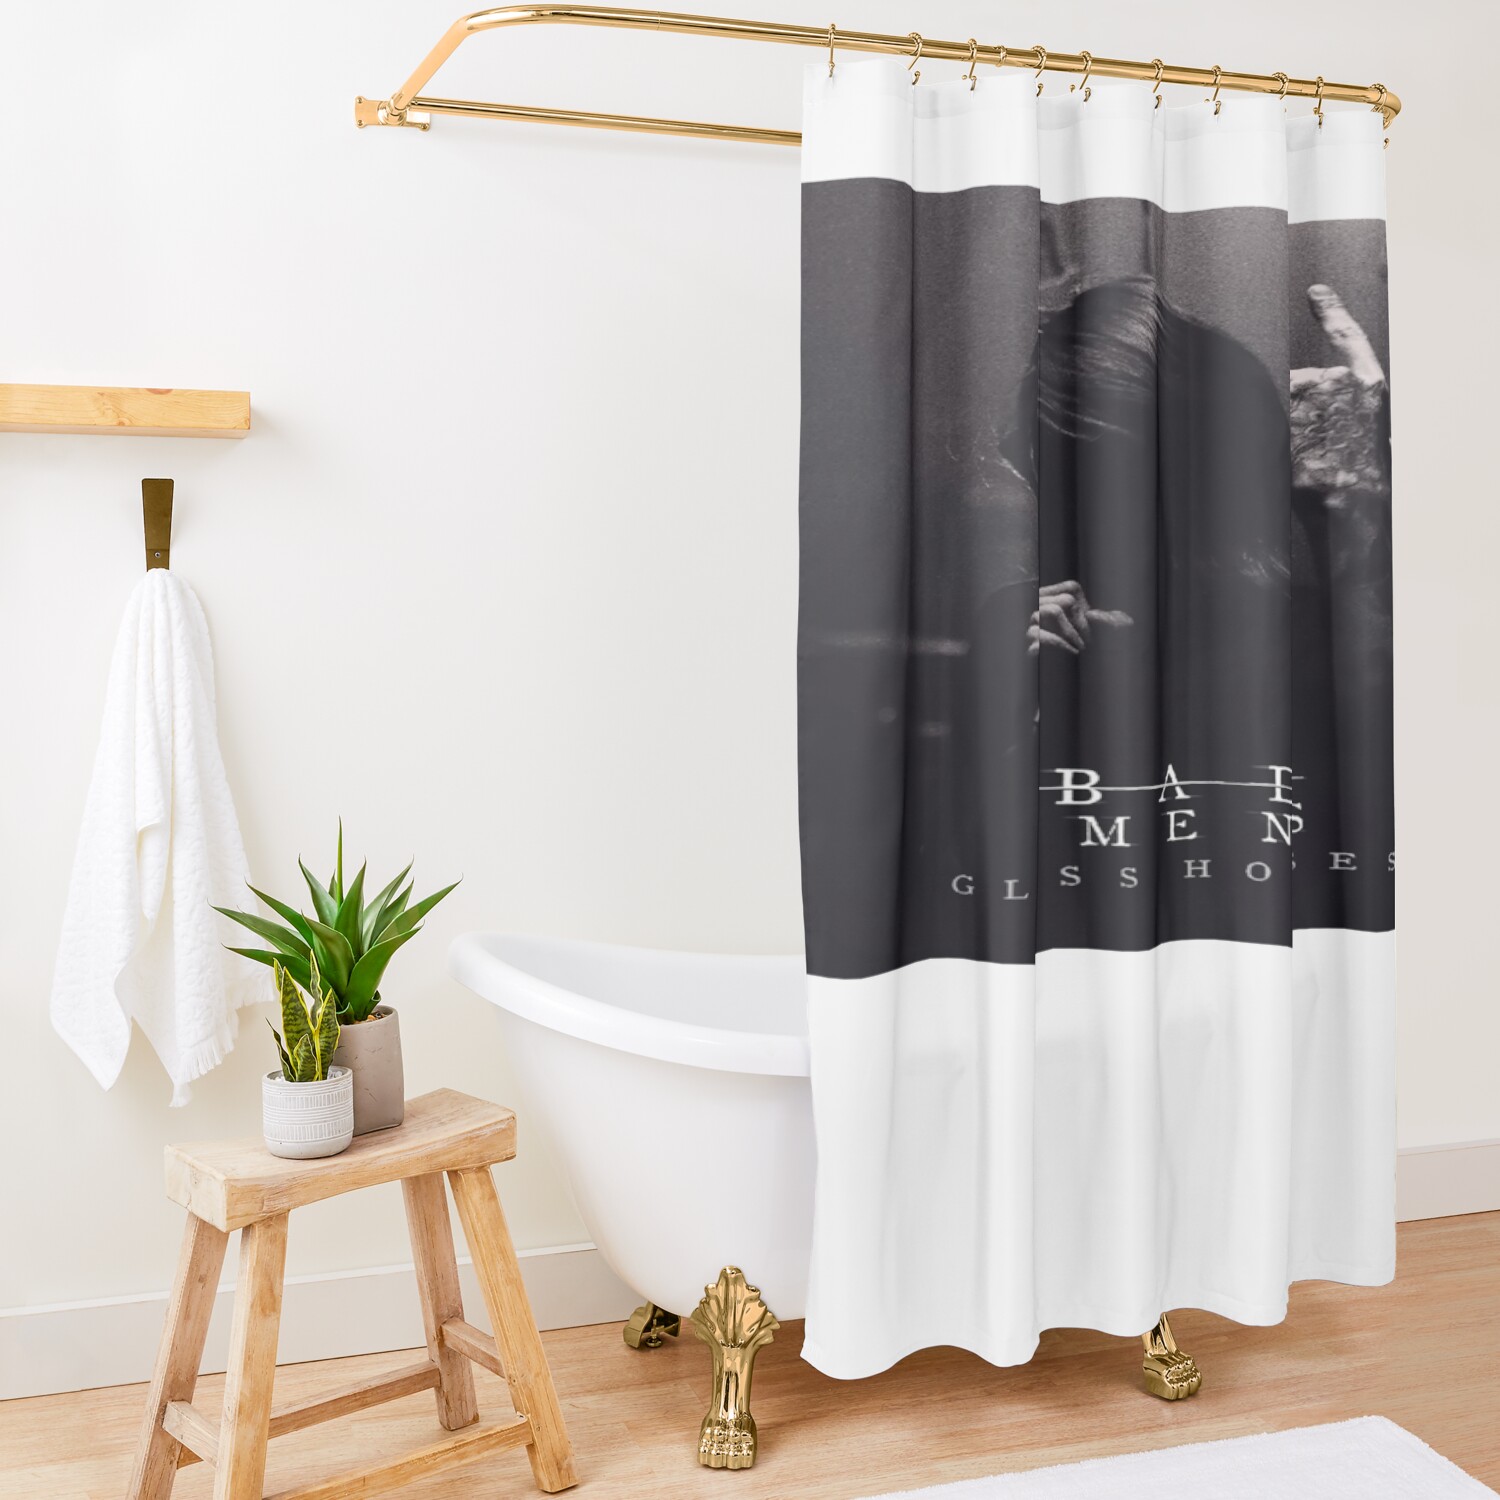 urshower curtain opensquare1500x1500 8 - Bad Omens Shop